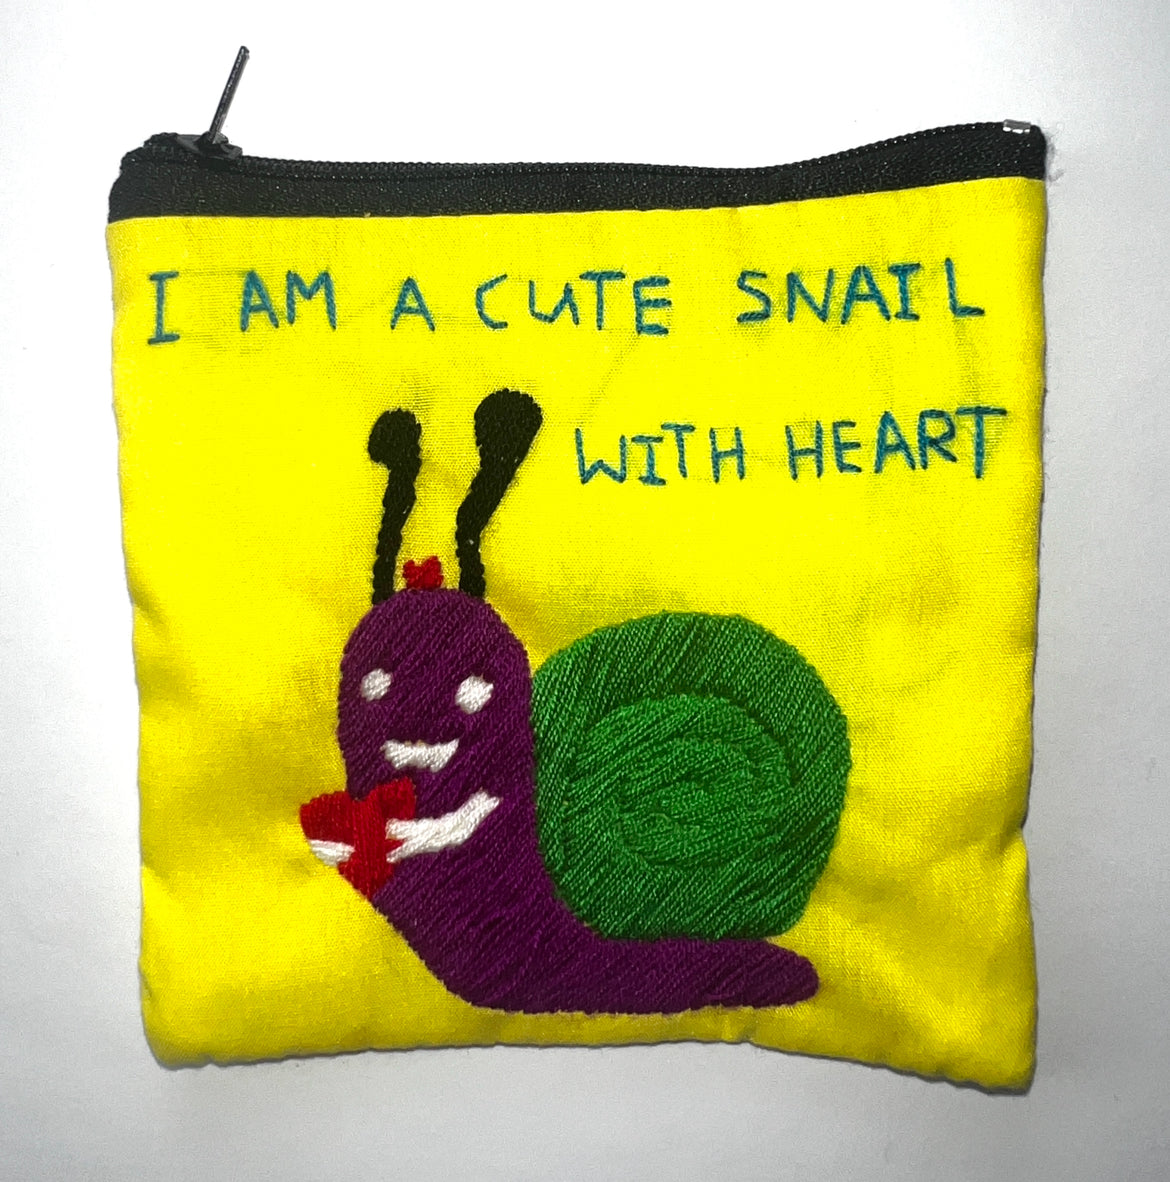 "Chalee" Hand Embroidered Pouches by Hmong students